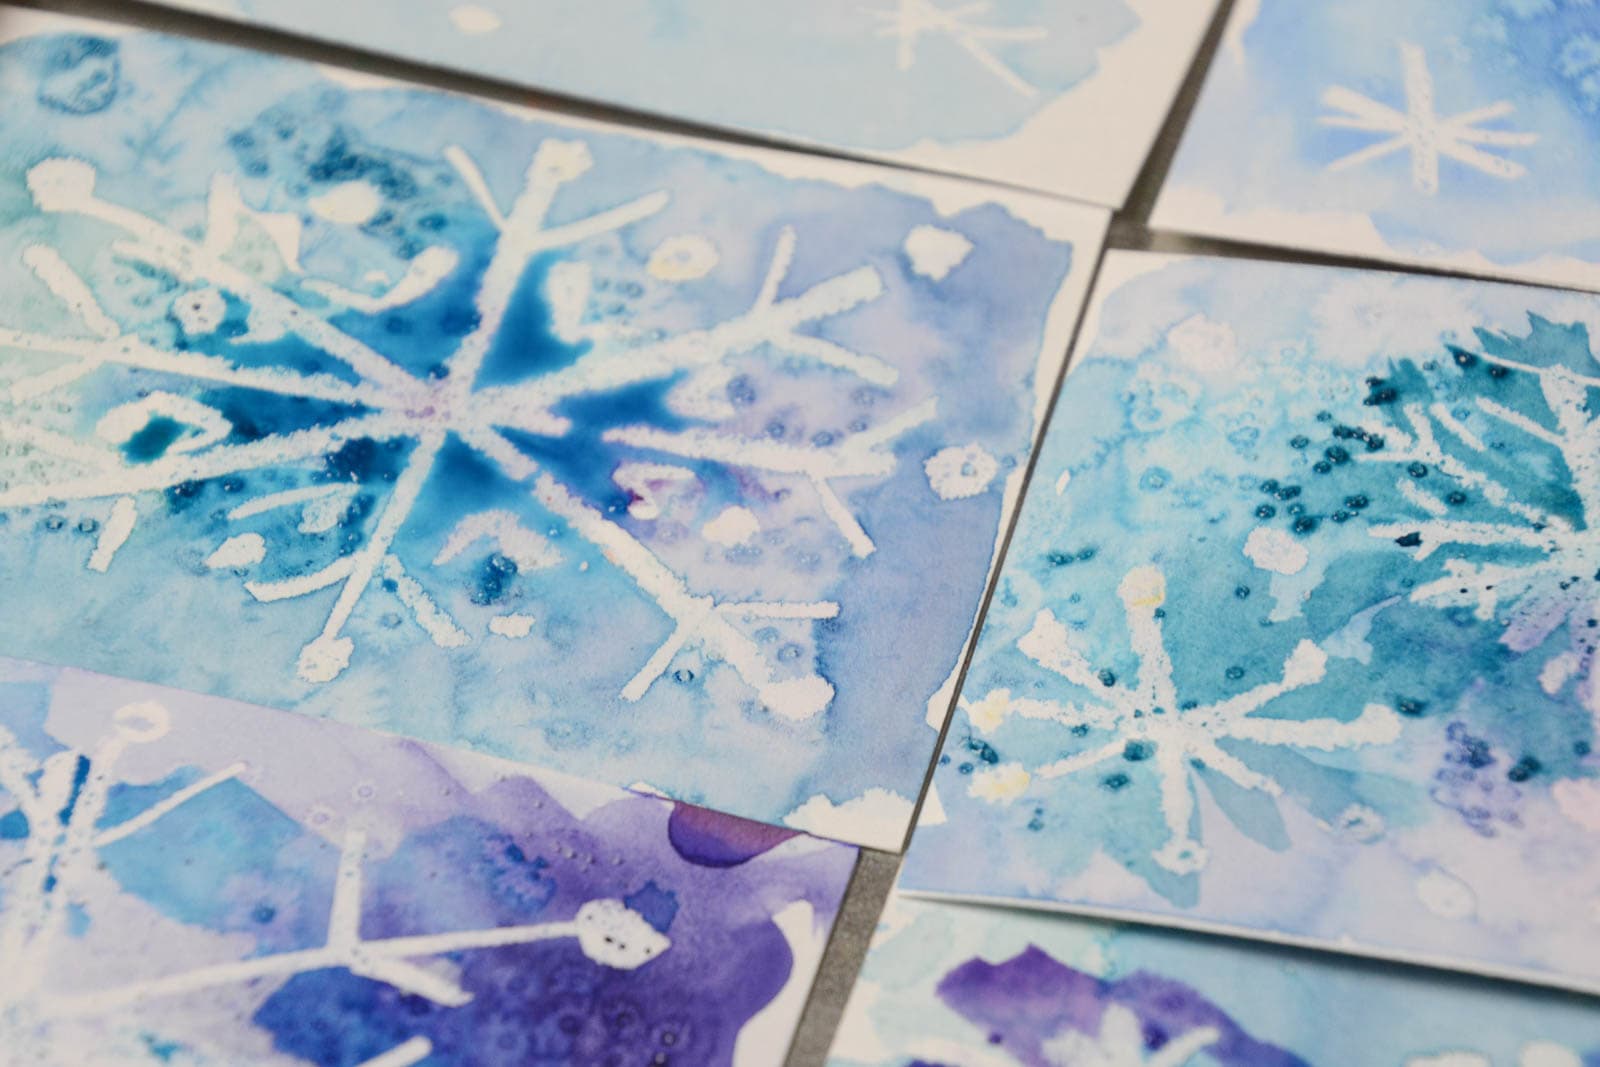 Easy Snowflake Art Idea With Salt and Watercolor